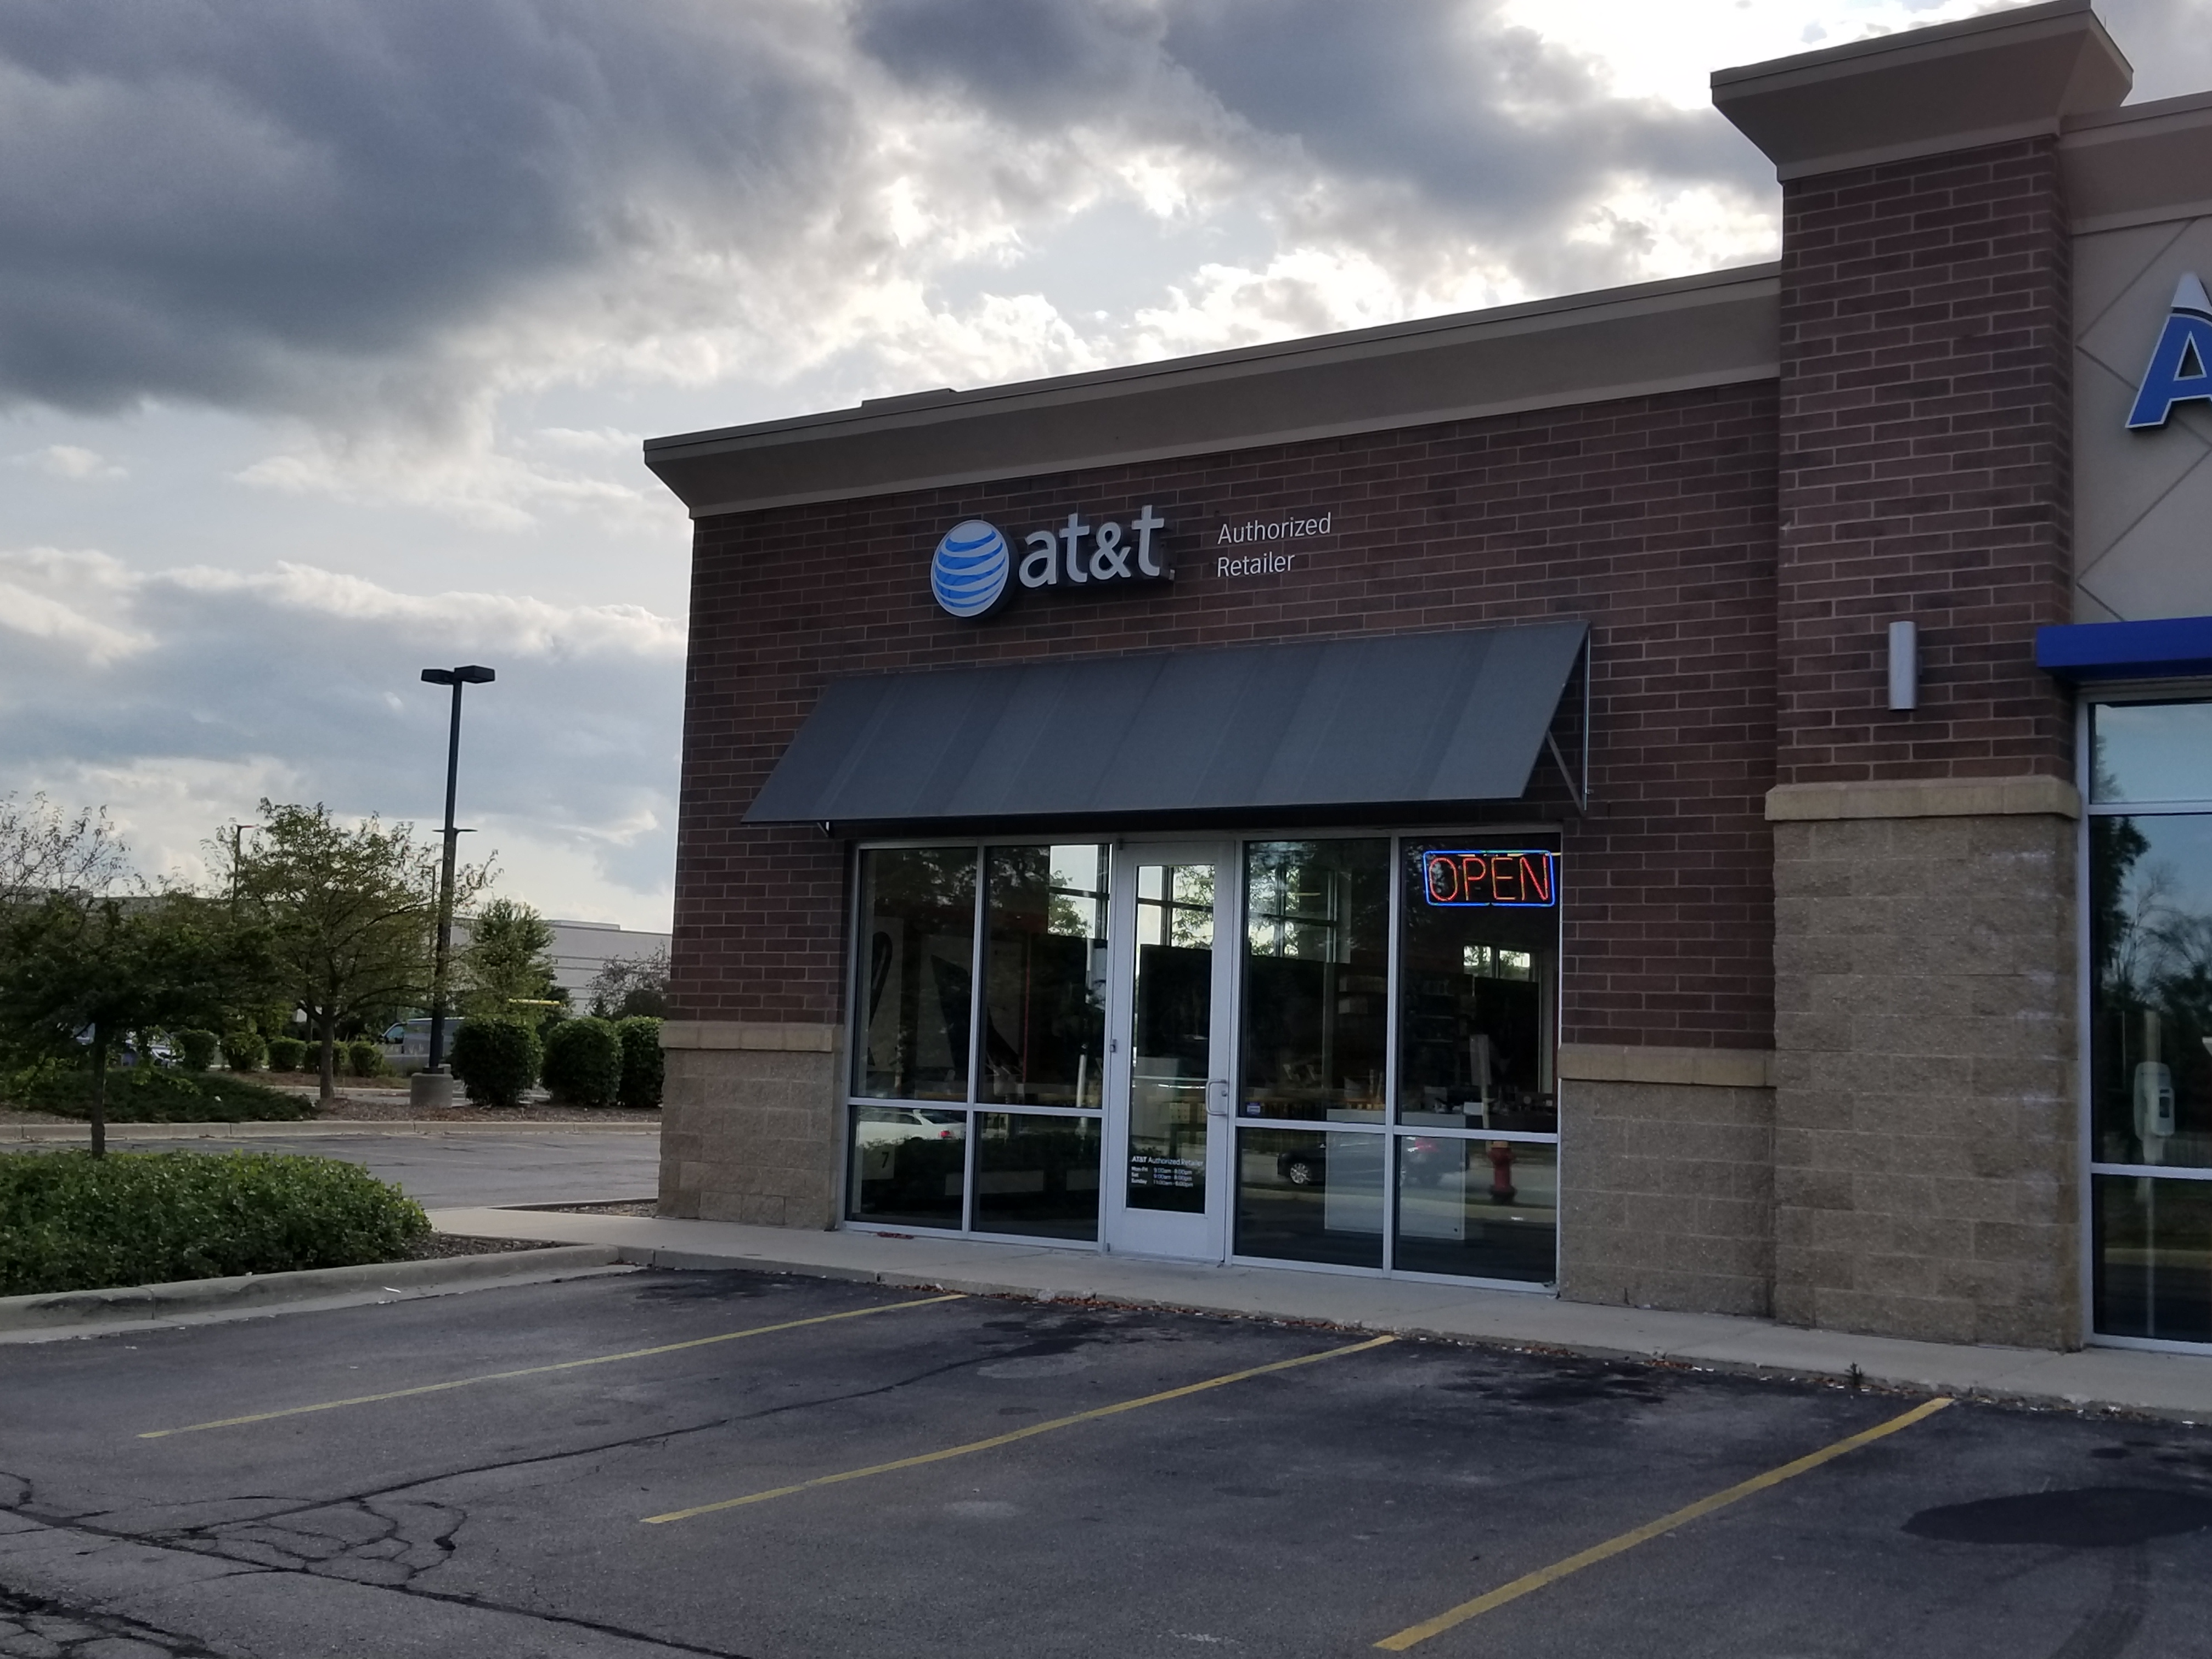 AT&T Store Coupons near me in Oak Creek, WI 53154 | 8coupons